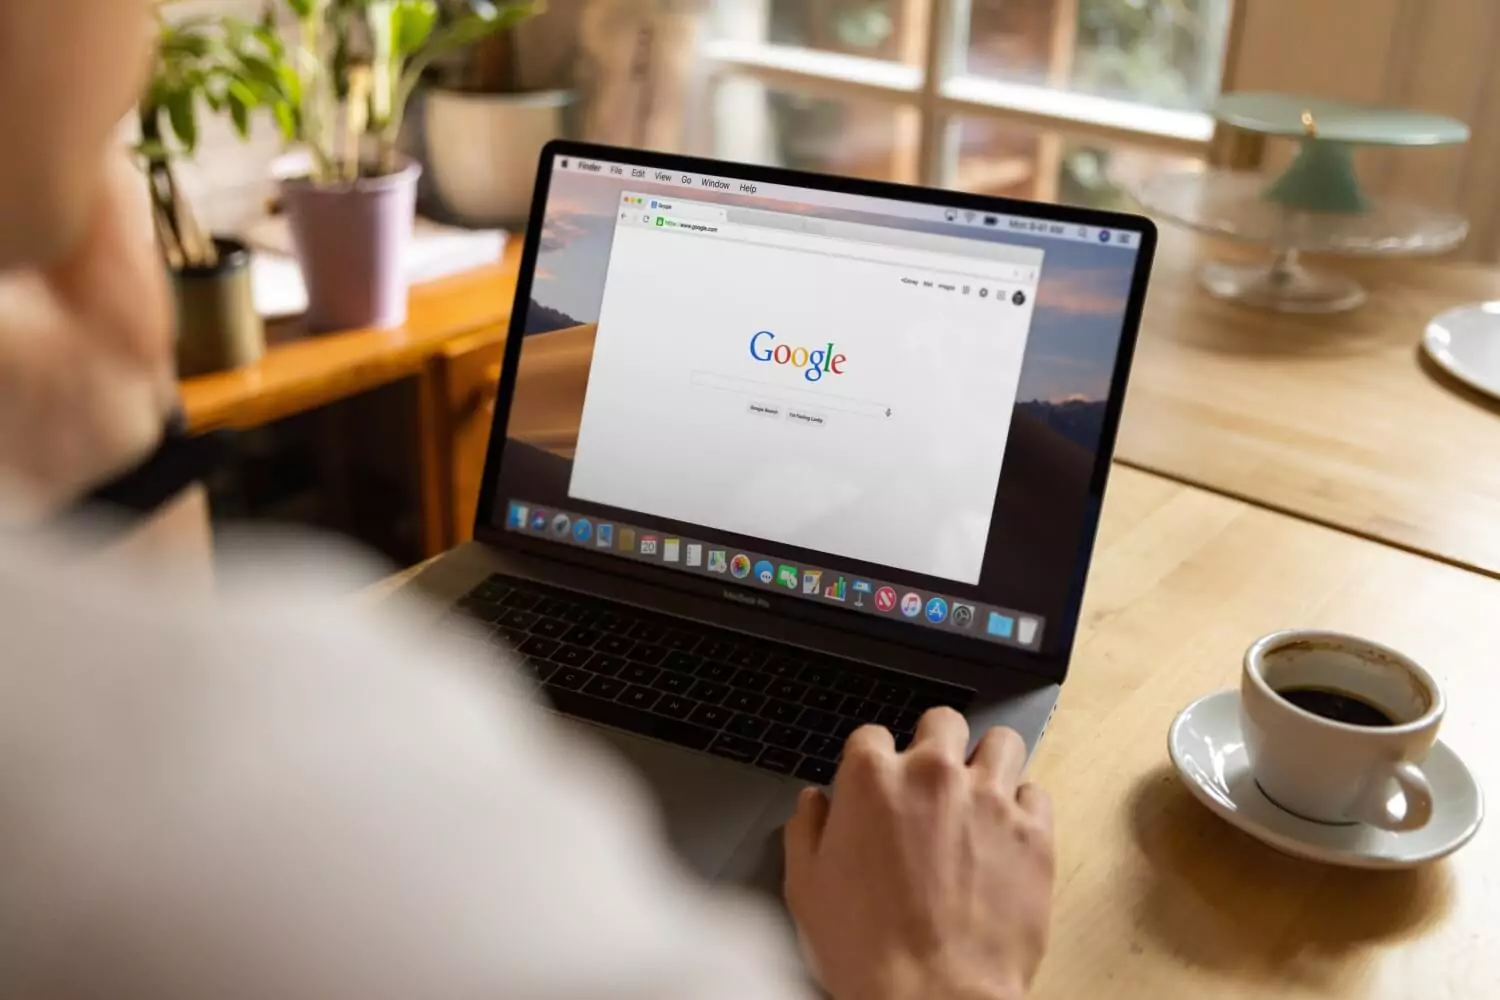 Publishing Optimised Content Boosts Your Google Rankings and Brings More People to Your Site